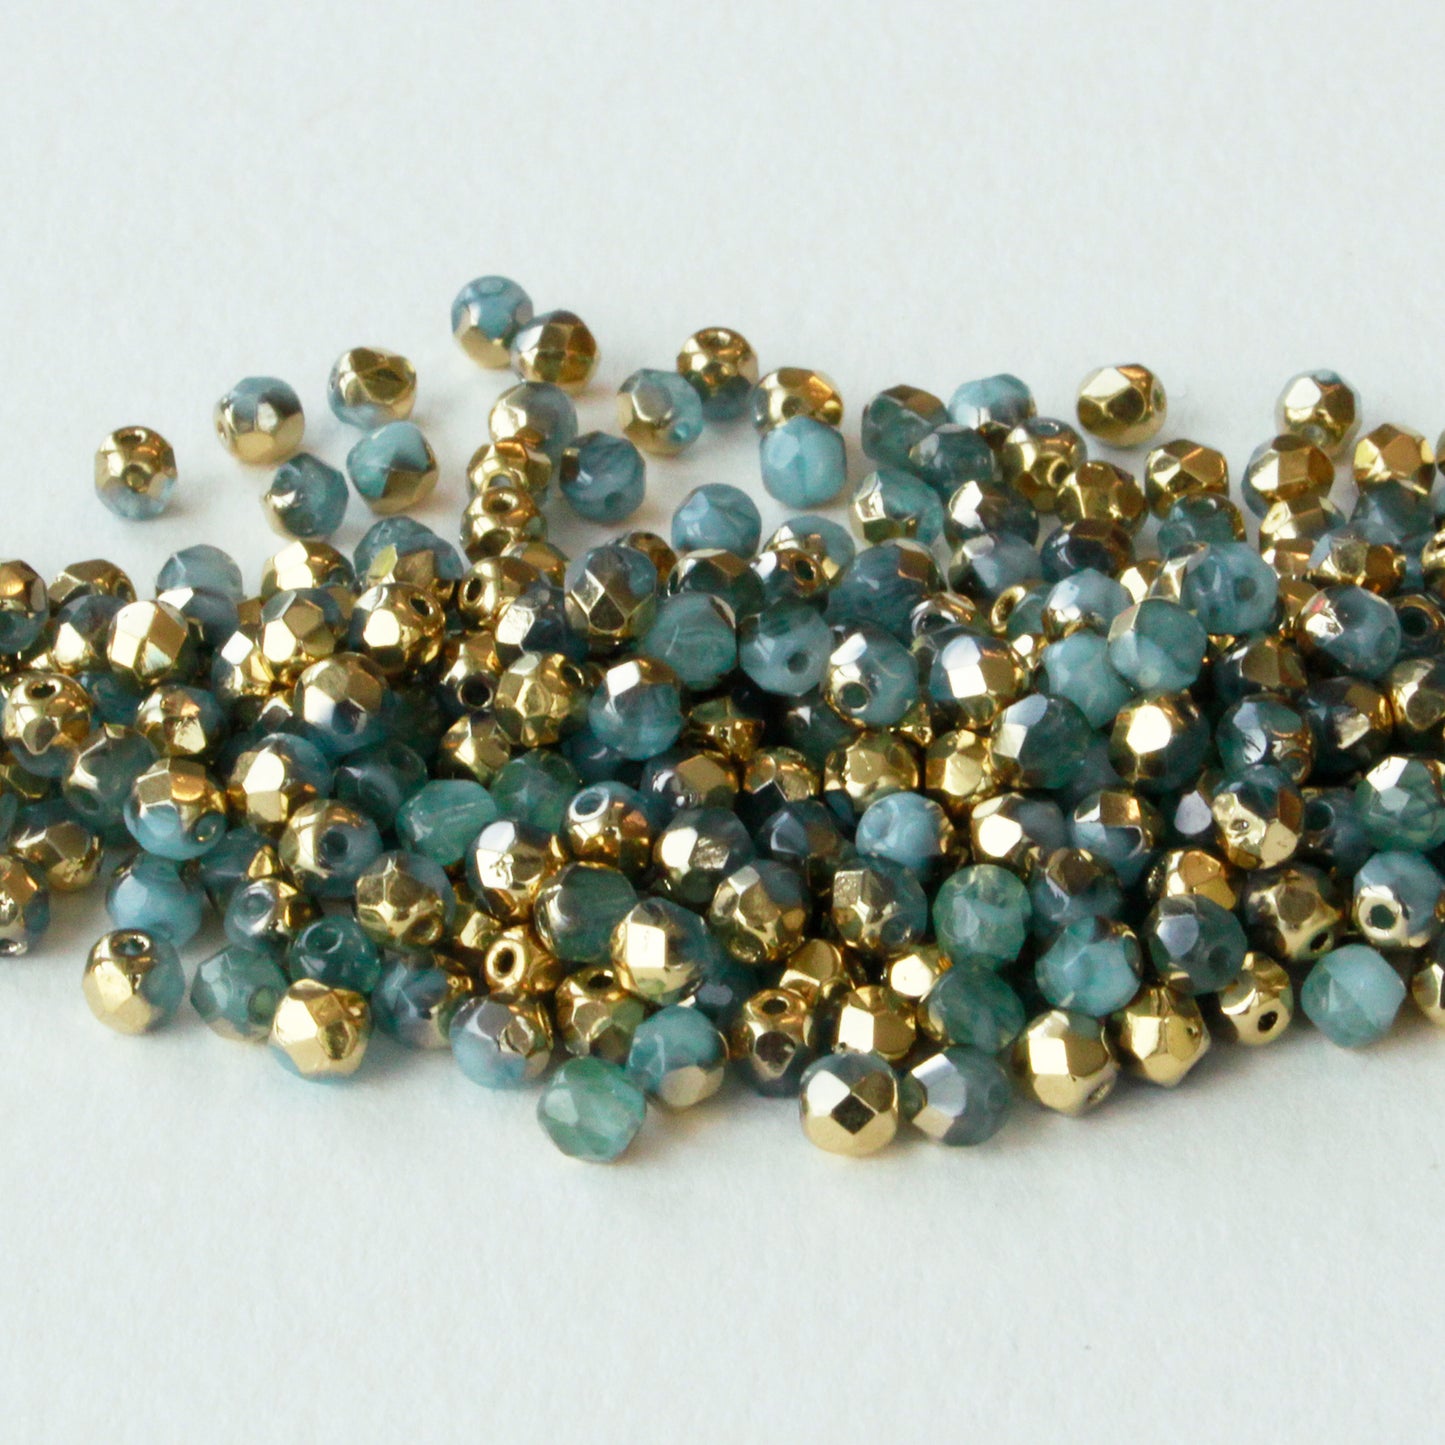 4mm Round Firepolished Beads - Aqua with Gold  - 100 beads